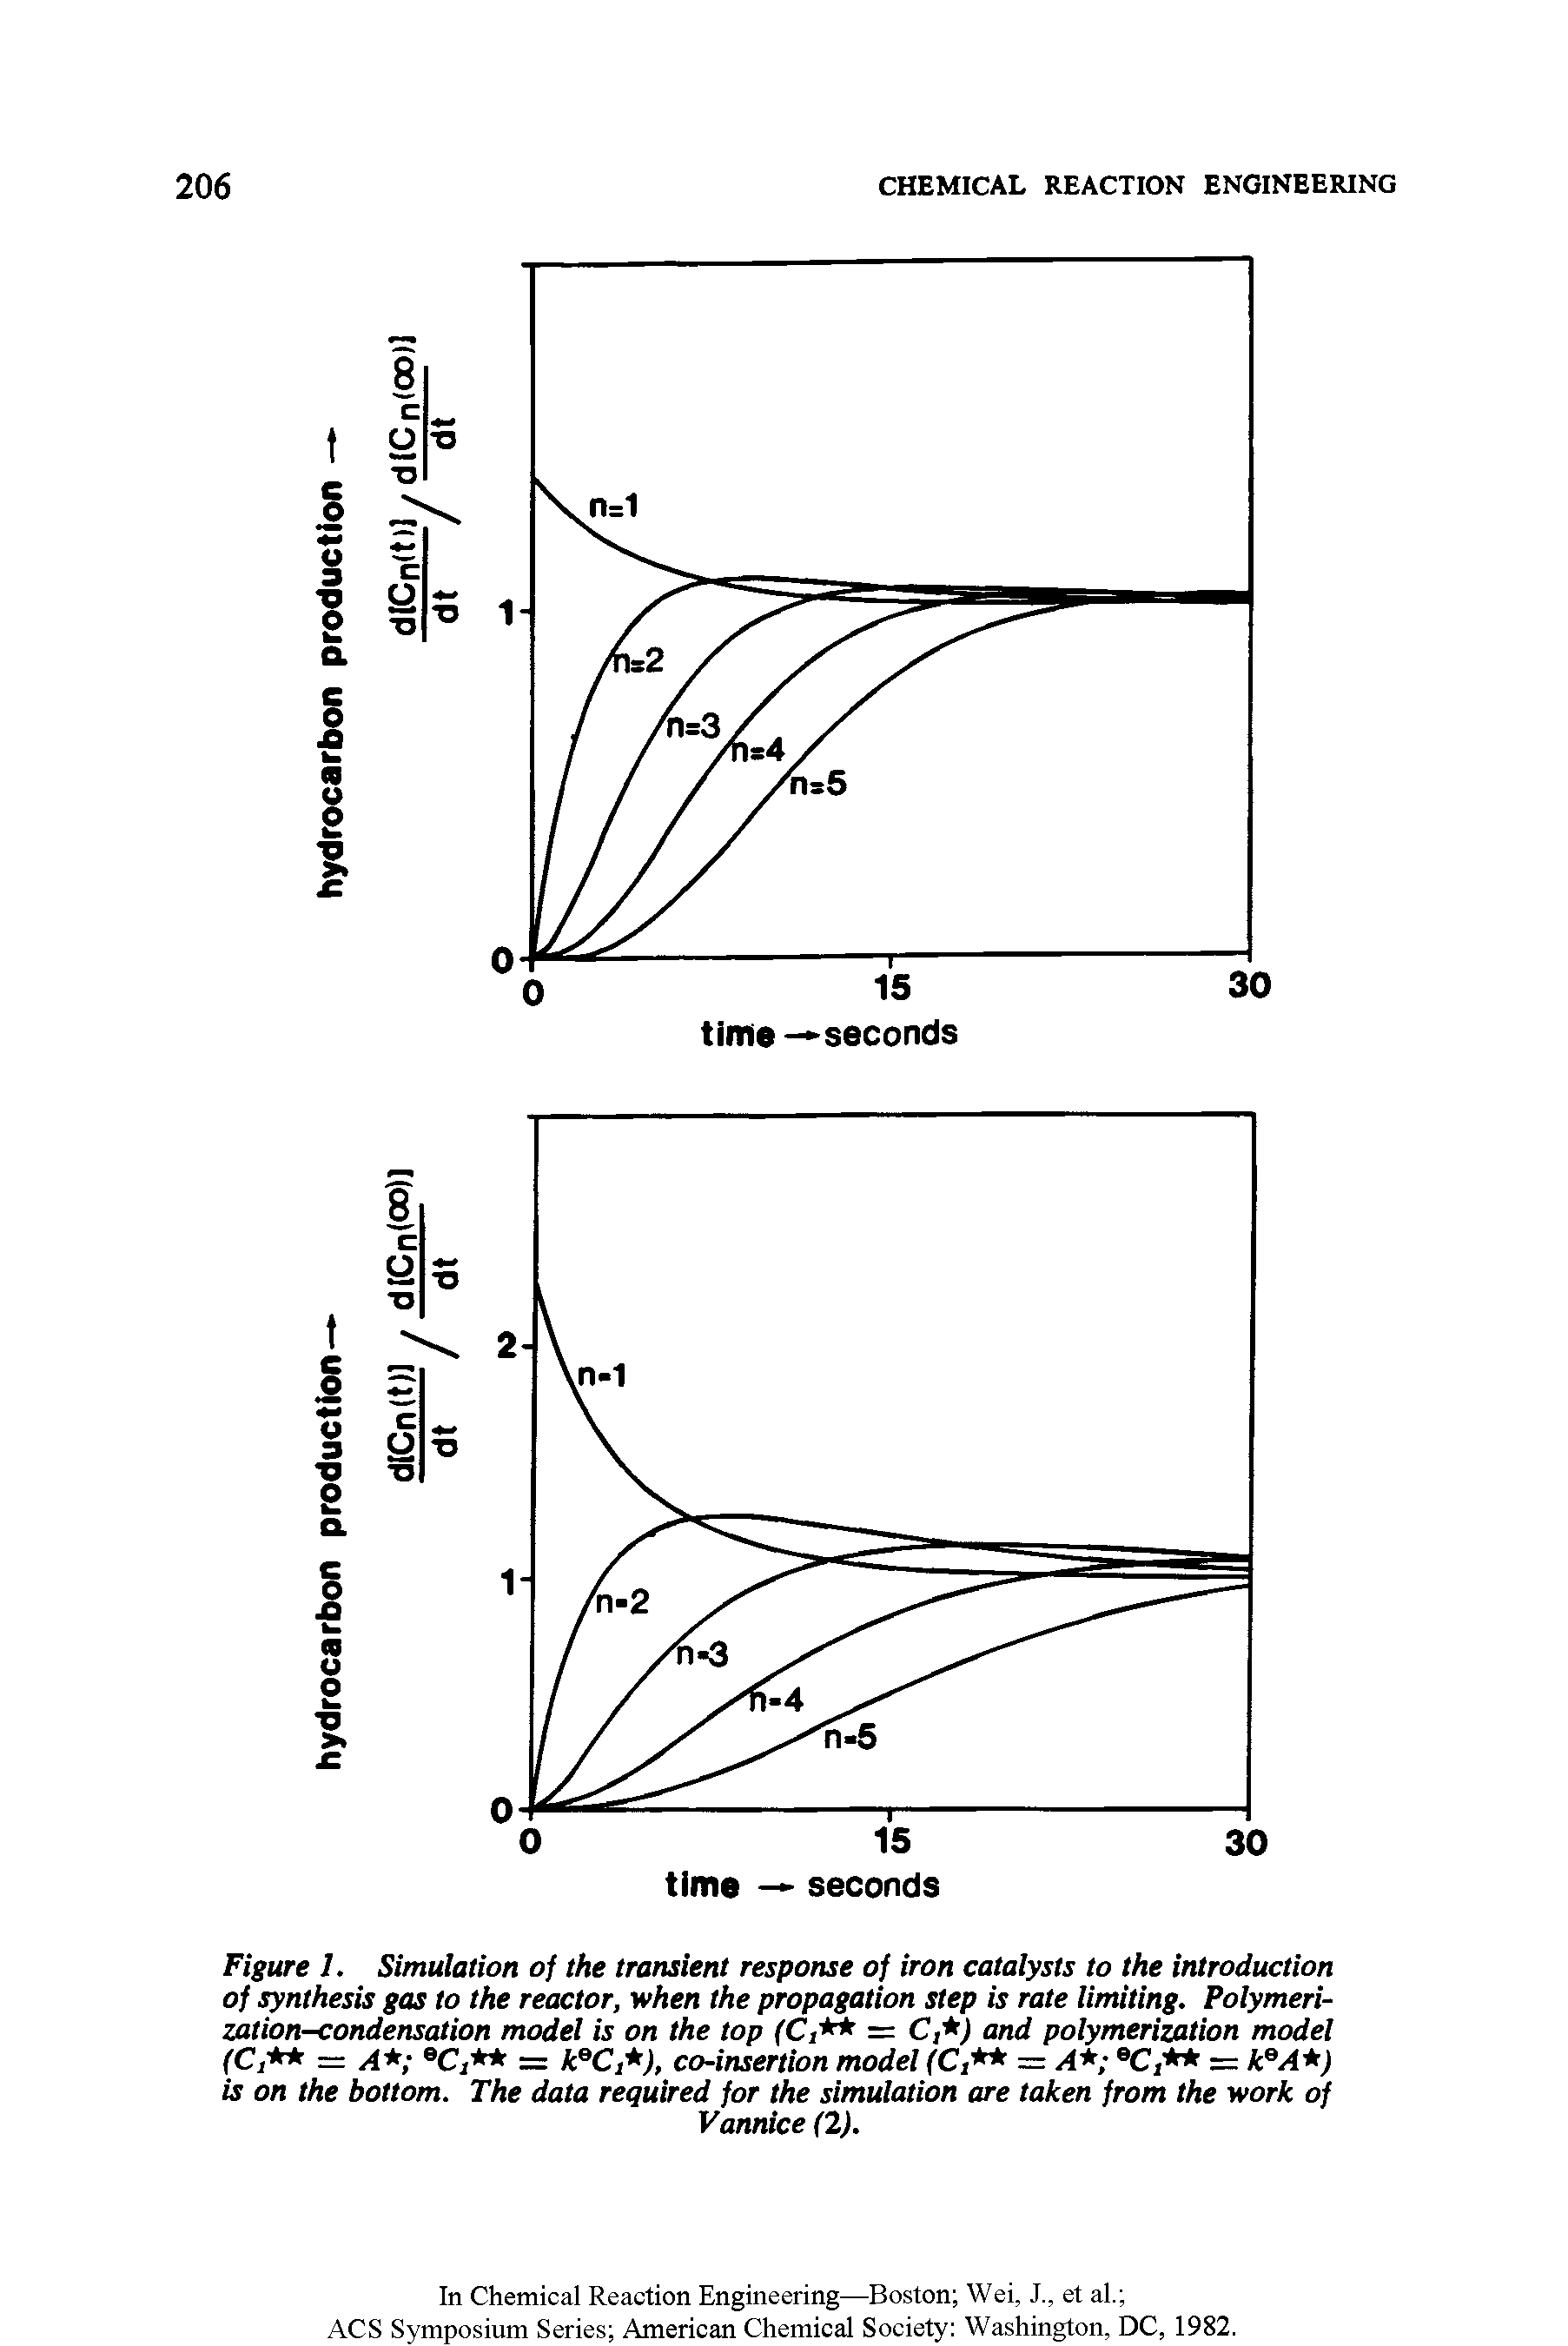 Figure 1. Simulation of the transient response of iron catalysts to the introduction of synthesis gas to the reactor, when the propagation step is rate limiting. Polymerization-condensation model is on the top (Ct + = C, ) and polymerization model (C, = A eCj = keC J, co-insertion model (C, = A eC, = keA ) is on the bottom. The data required for the simulation are taken from the work of...